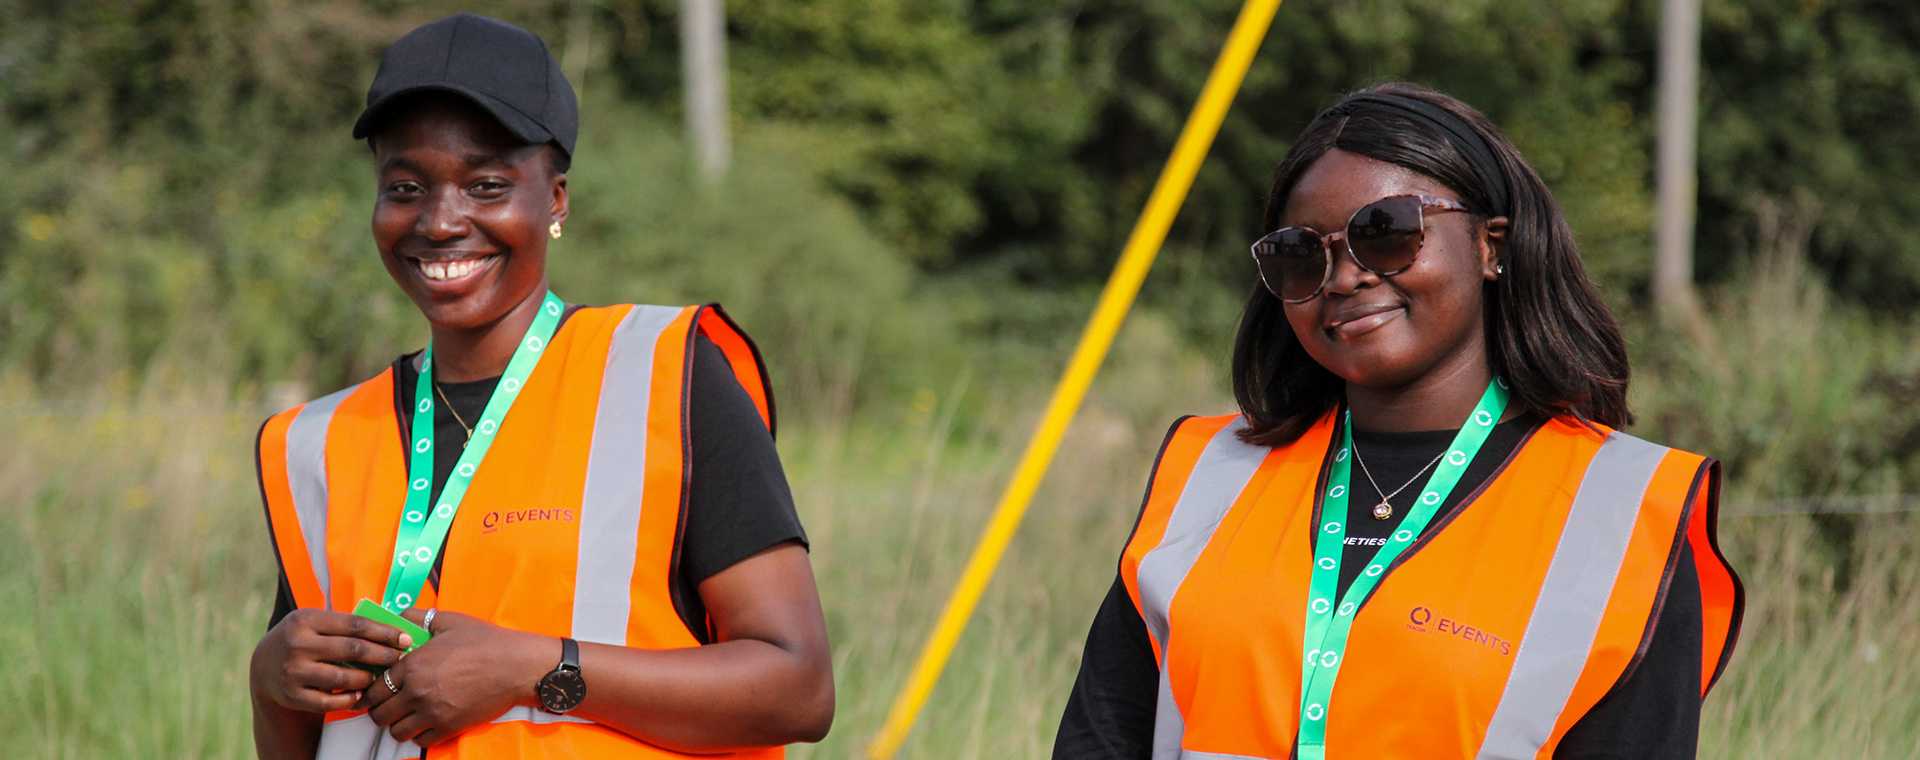 Two Tracsis Events Marshals smiling